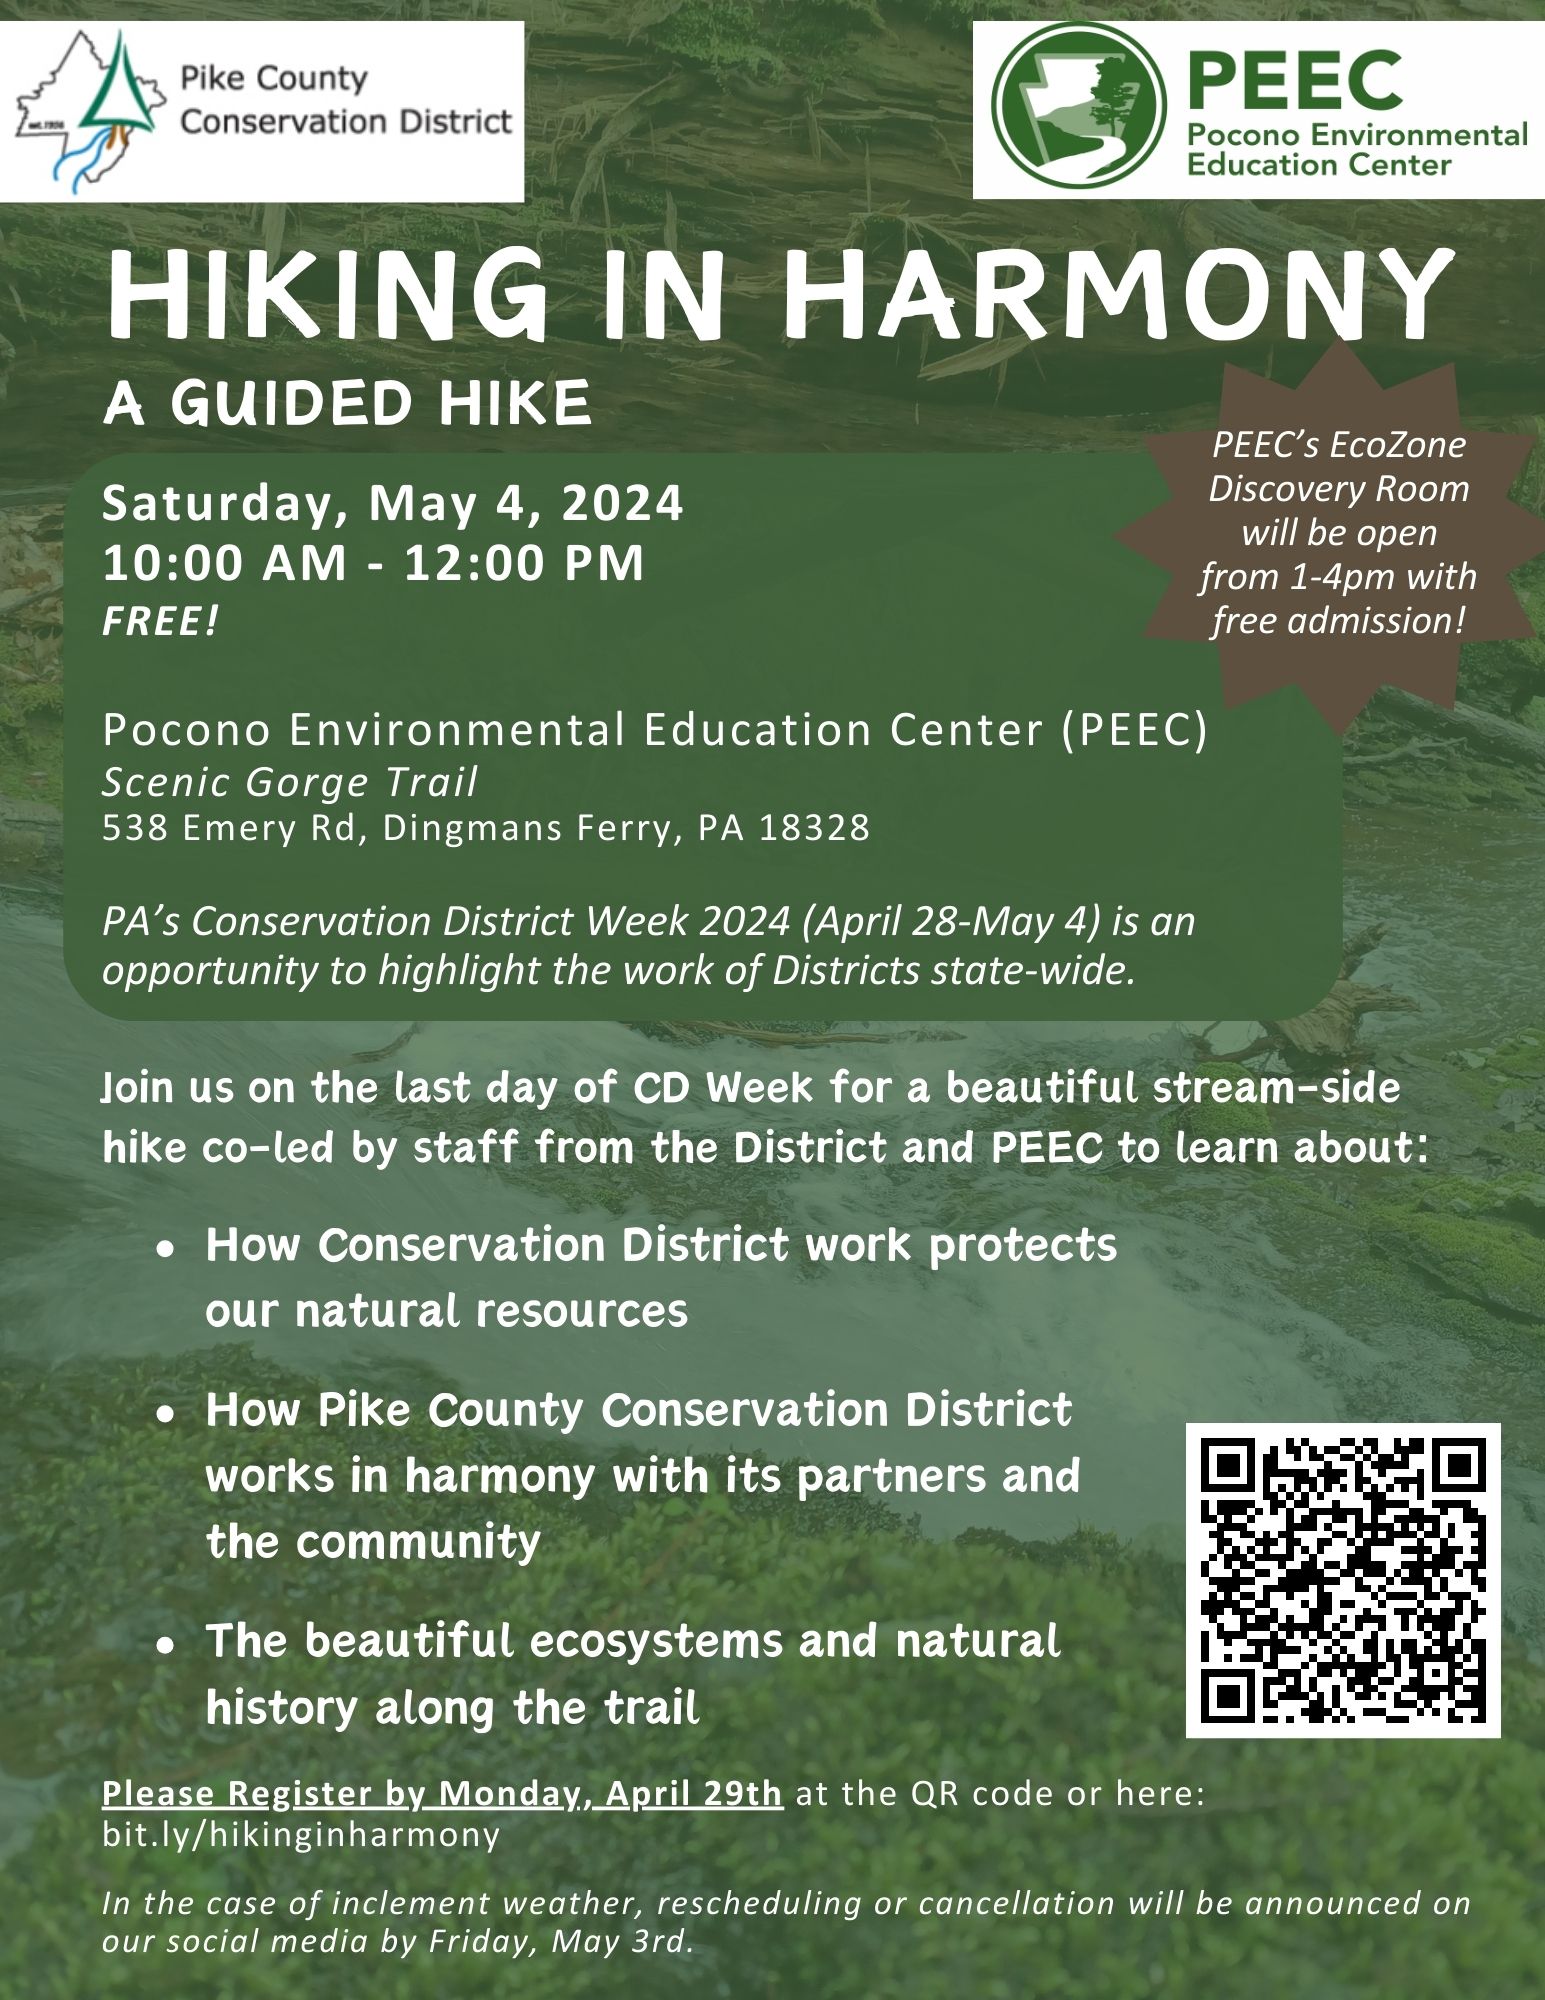 A flyer for the event Hiking in Harmony, a guided hike celebrating PA's Conservation District Week. Text reads "PA’s Conservation District Week 2024 (April 28-May 4) is an opportunity to highlight the work of Districts state-wide.
Join us on the last day of CD Week for a beautiful stream-side hike co-led by staff from the District and PEEC to learn about:
- How Conservation District work protects our natural resources
- How Pike County Conservation District works in harmony with its partners and the community
- The beautiful ecosystems and natural history along the trail
Please Register by Monday, April 29th here:
https://bit.ly/hikinginharmony
In the case of inclement weather, rescheduling or cancellation will be announced on our social media by Friday, May 3rd."